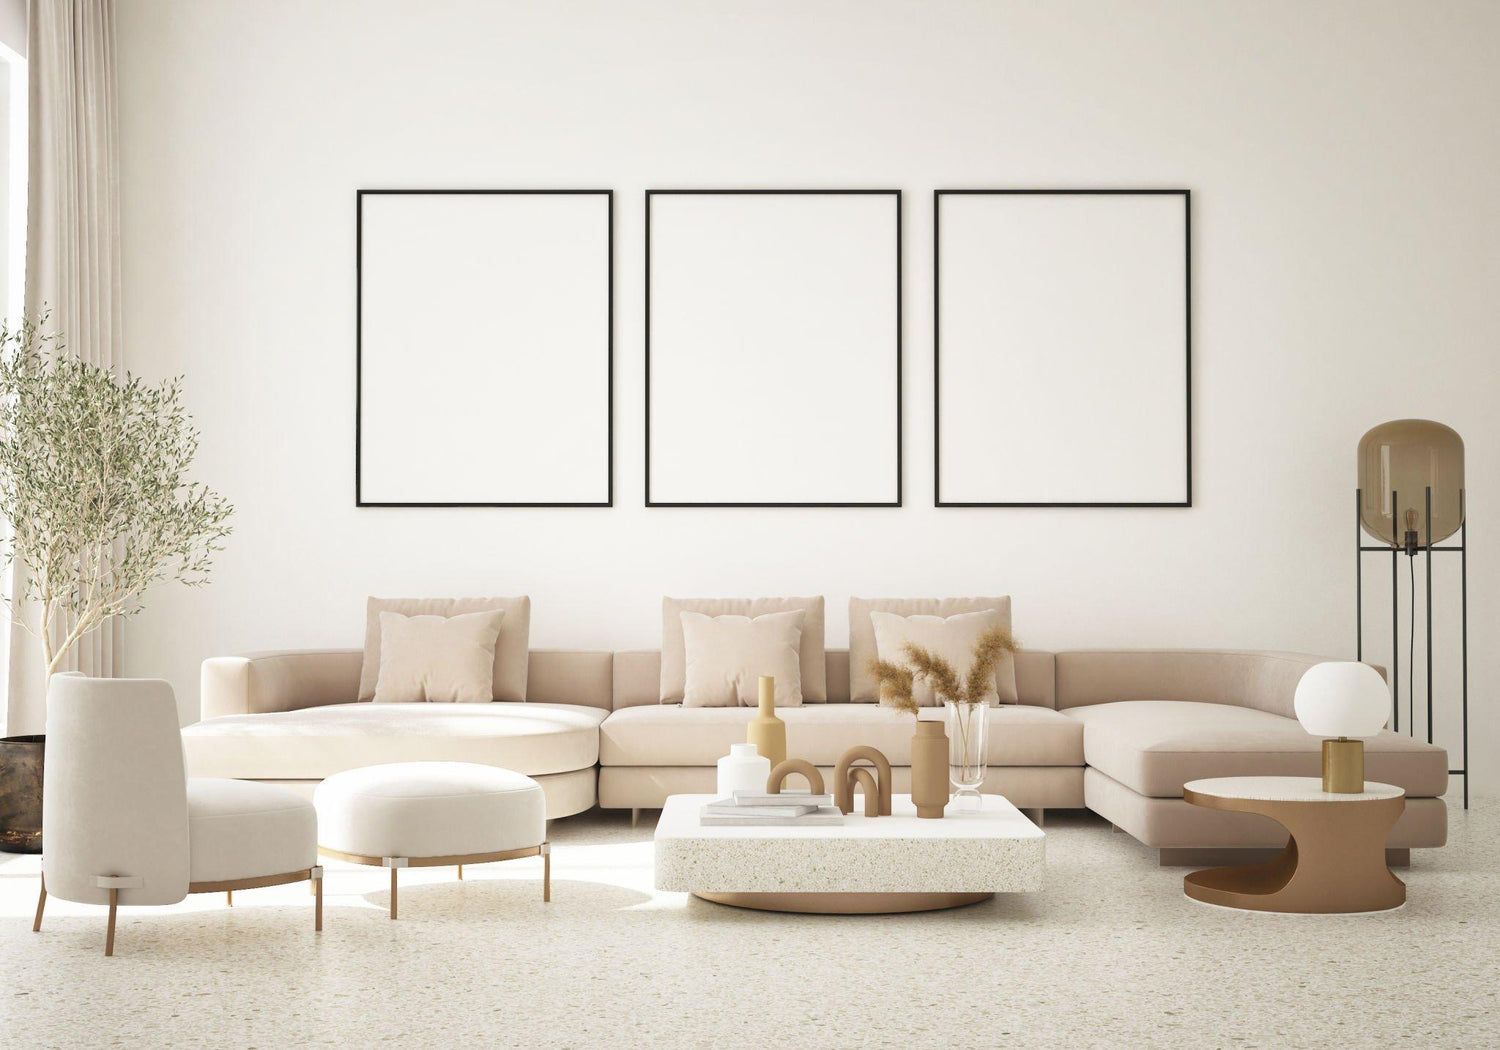 A modern living room featuring a neutral-toned sectional sofa, three framed artworks on the wall, a minimalist coffee table, and an elegant white armchair.